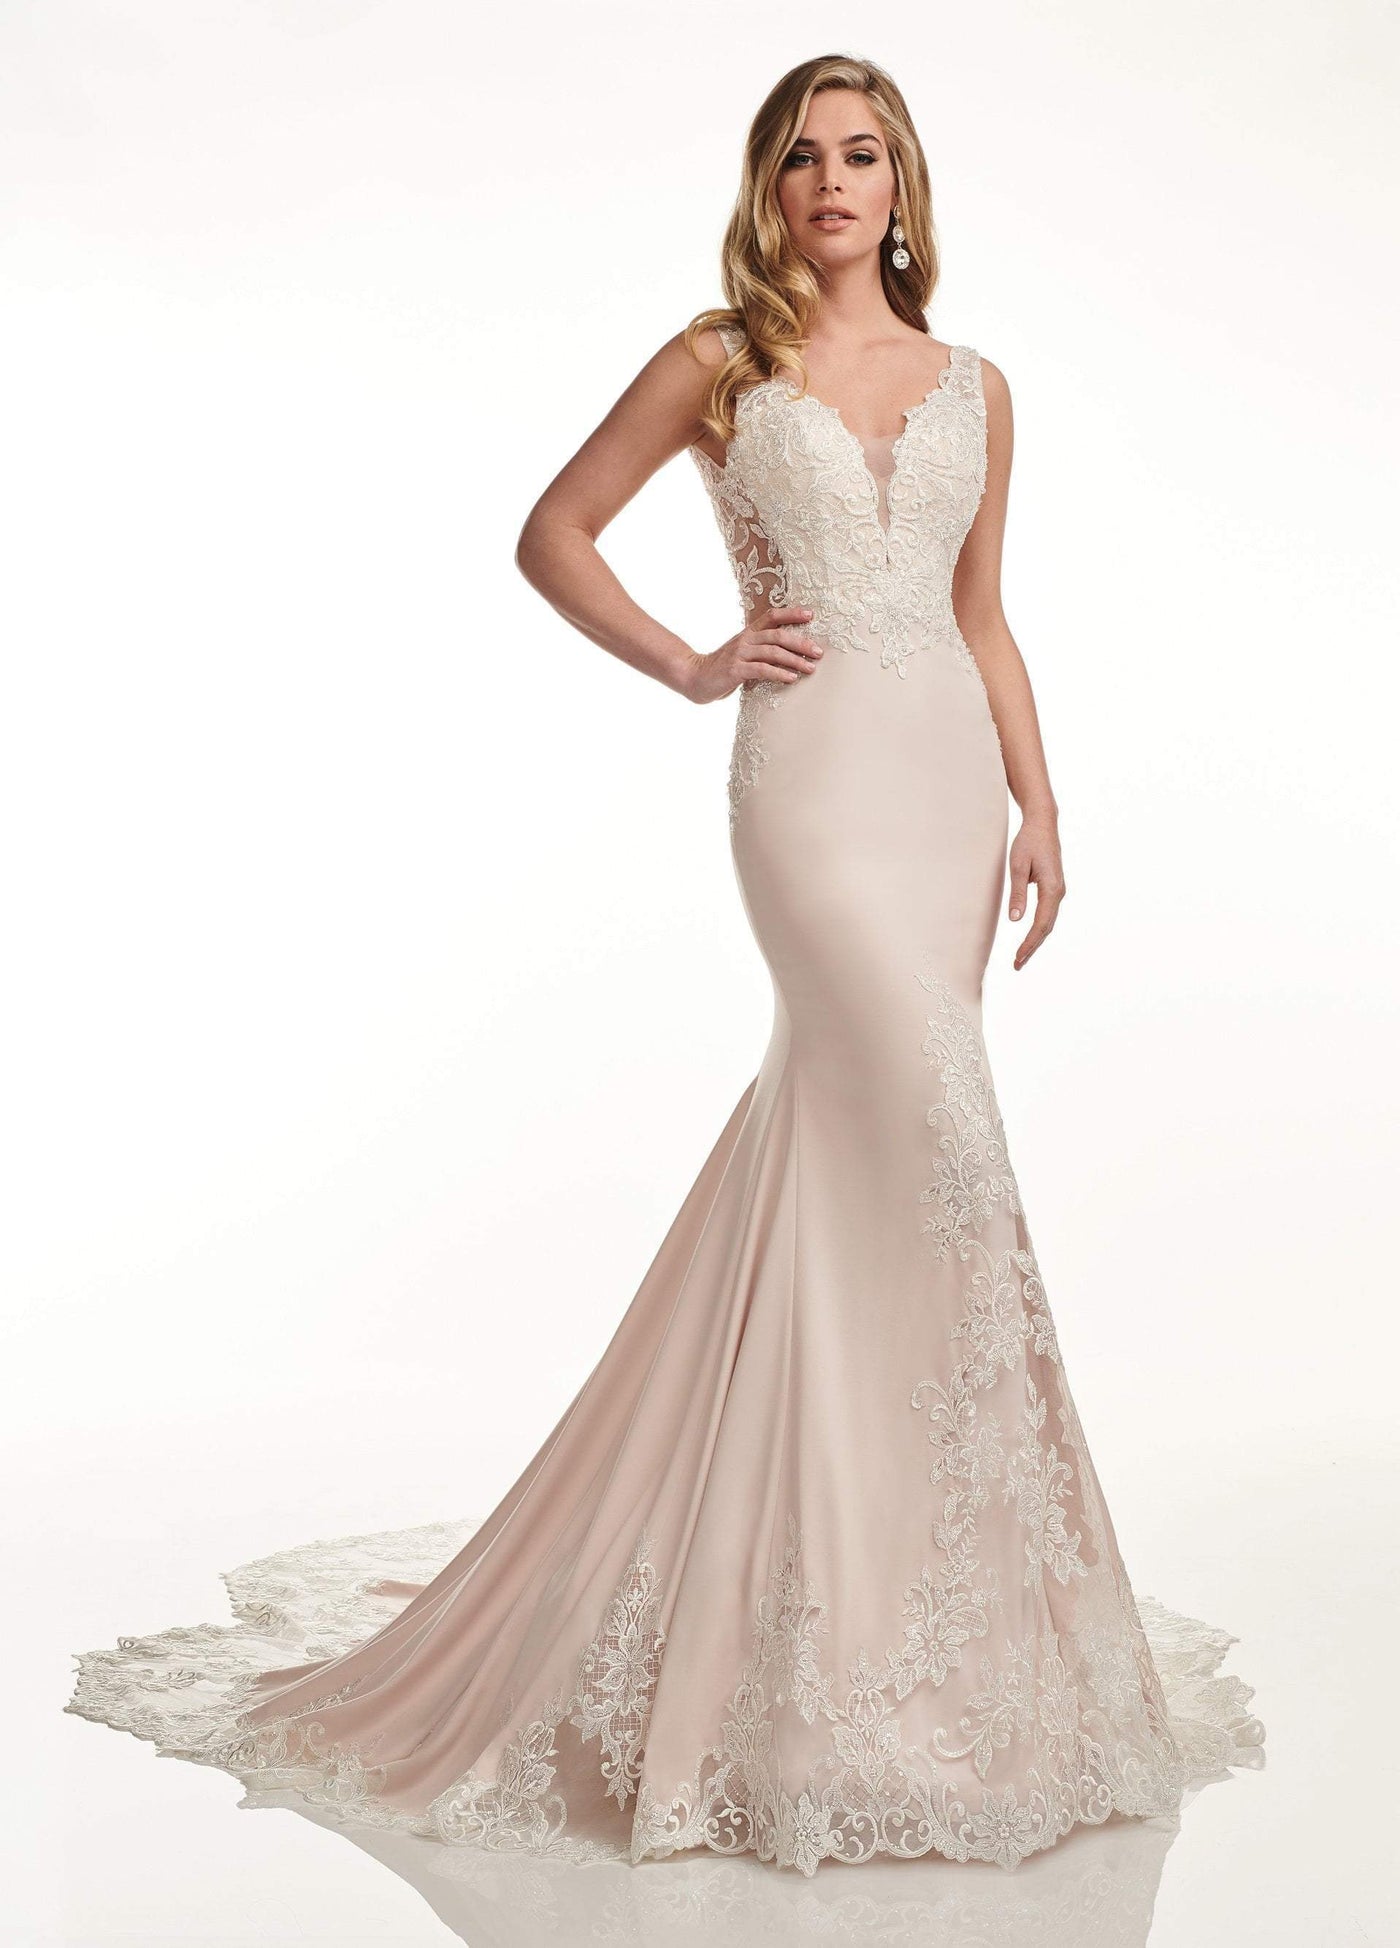 Lo'Adoro by Rachel Allan - M739 Low Scoop Back Mermaid Bridal Gown Special Occasion Dress 0 / Ivory Champagne